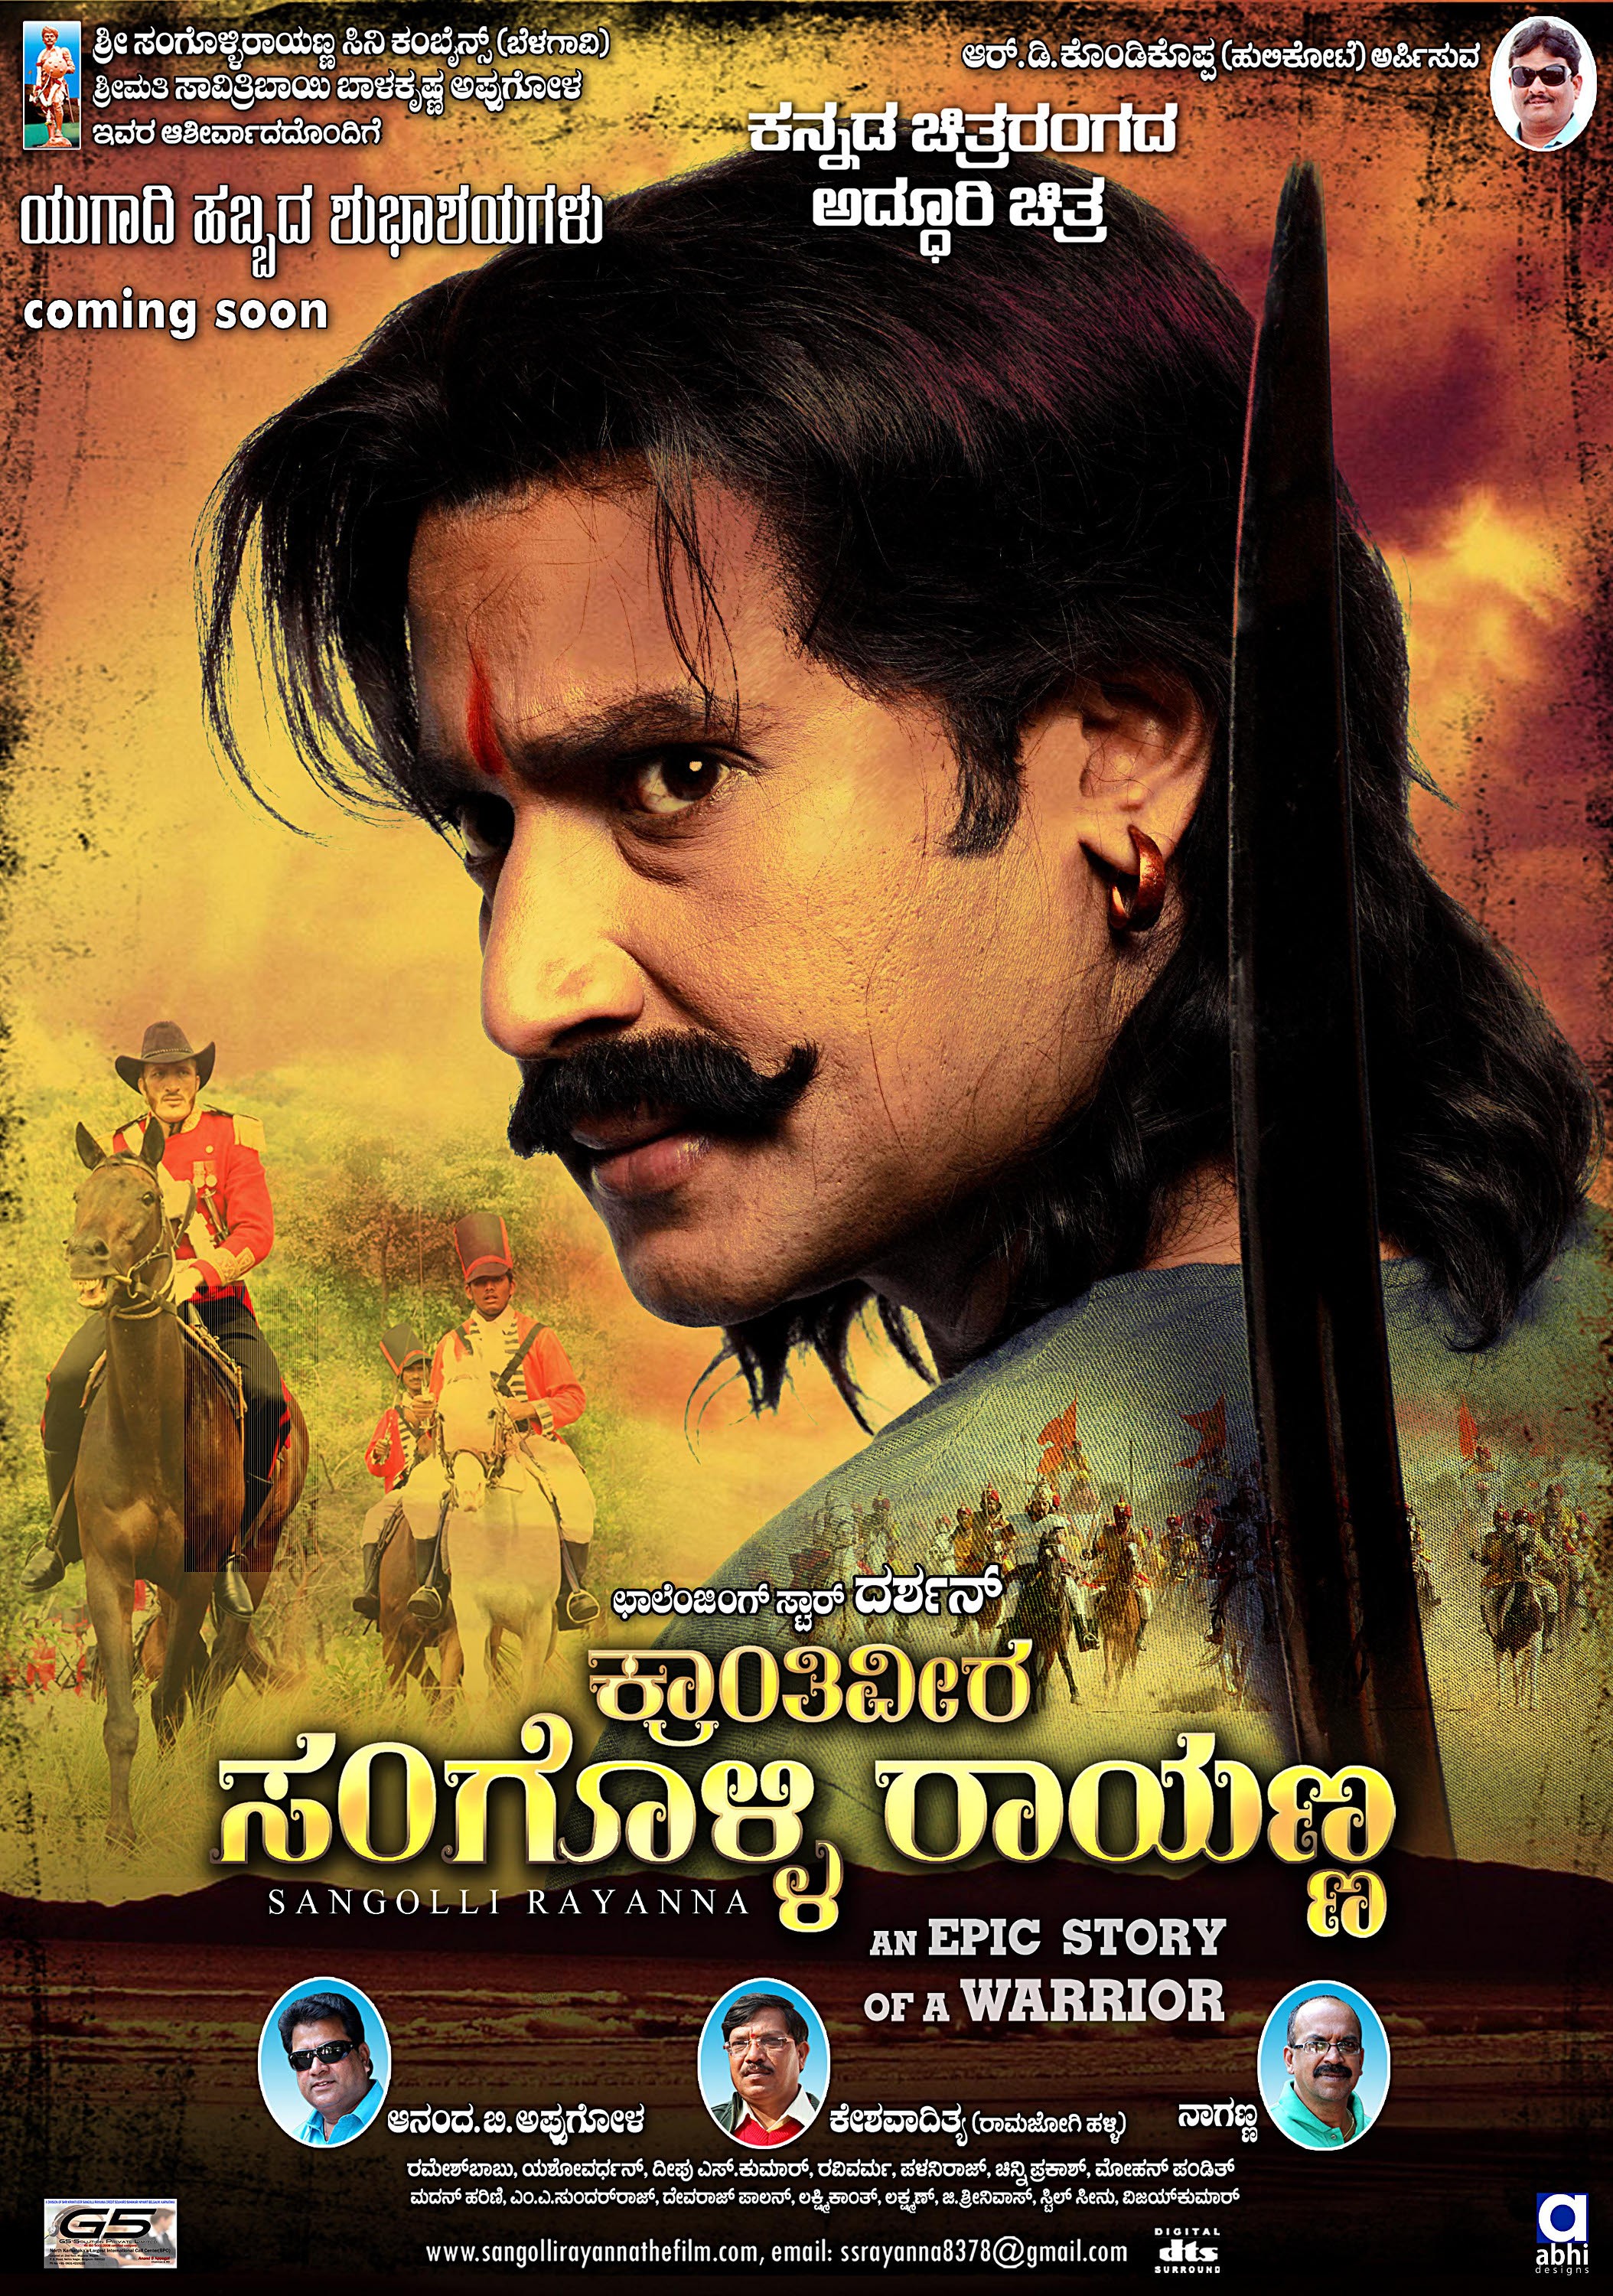 Mega Sized Movie Poster Image for Sangolli Rayanna (#32 of 79)